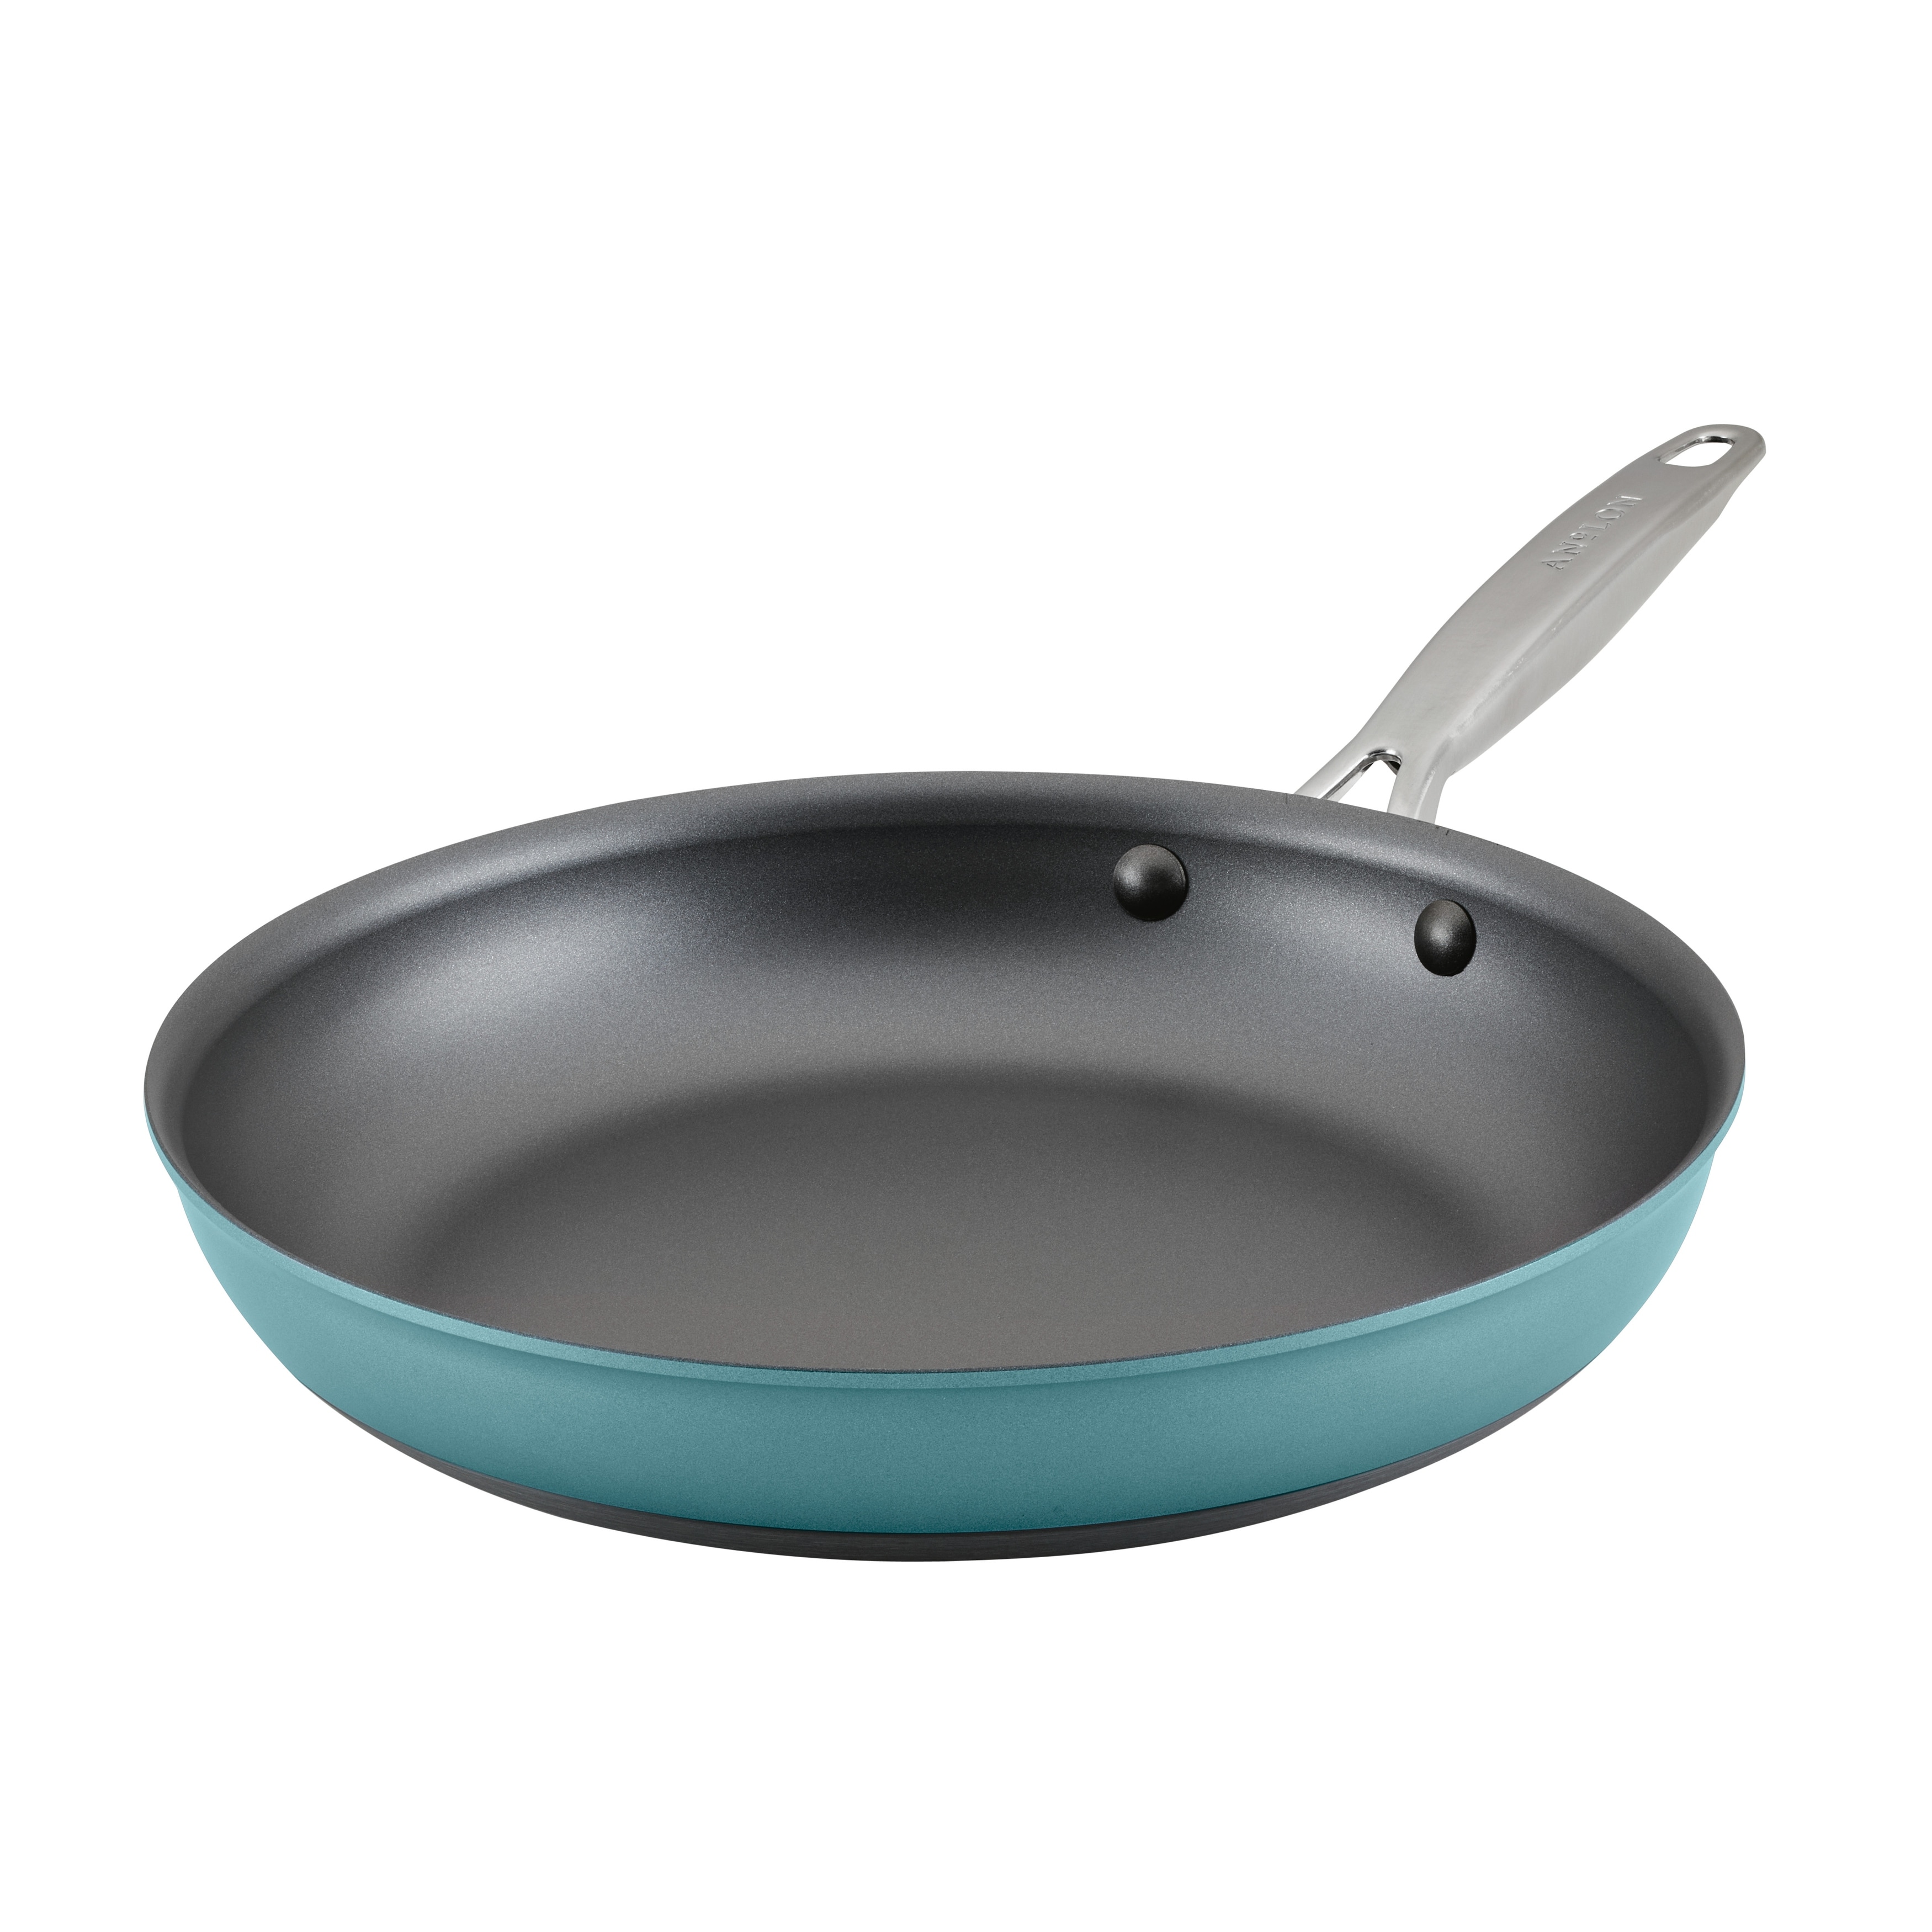 https://ak1.ostkcdn.com/images/products/is/images/direct/be123652a923a5fbf912adb274ef093f71b9e8a5/Anolon-Achieve-Hard-Anodized-Nonstick-Frying-Pan%2C-12-Inch.jpg